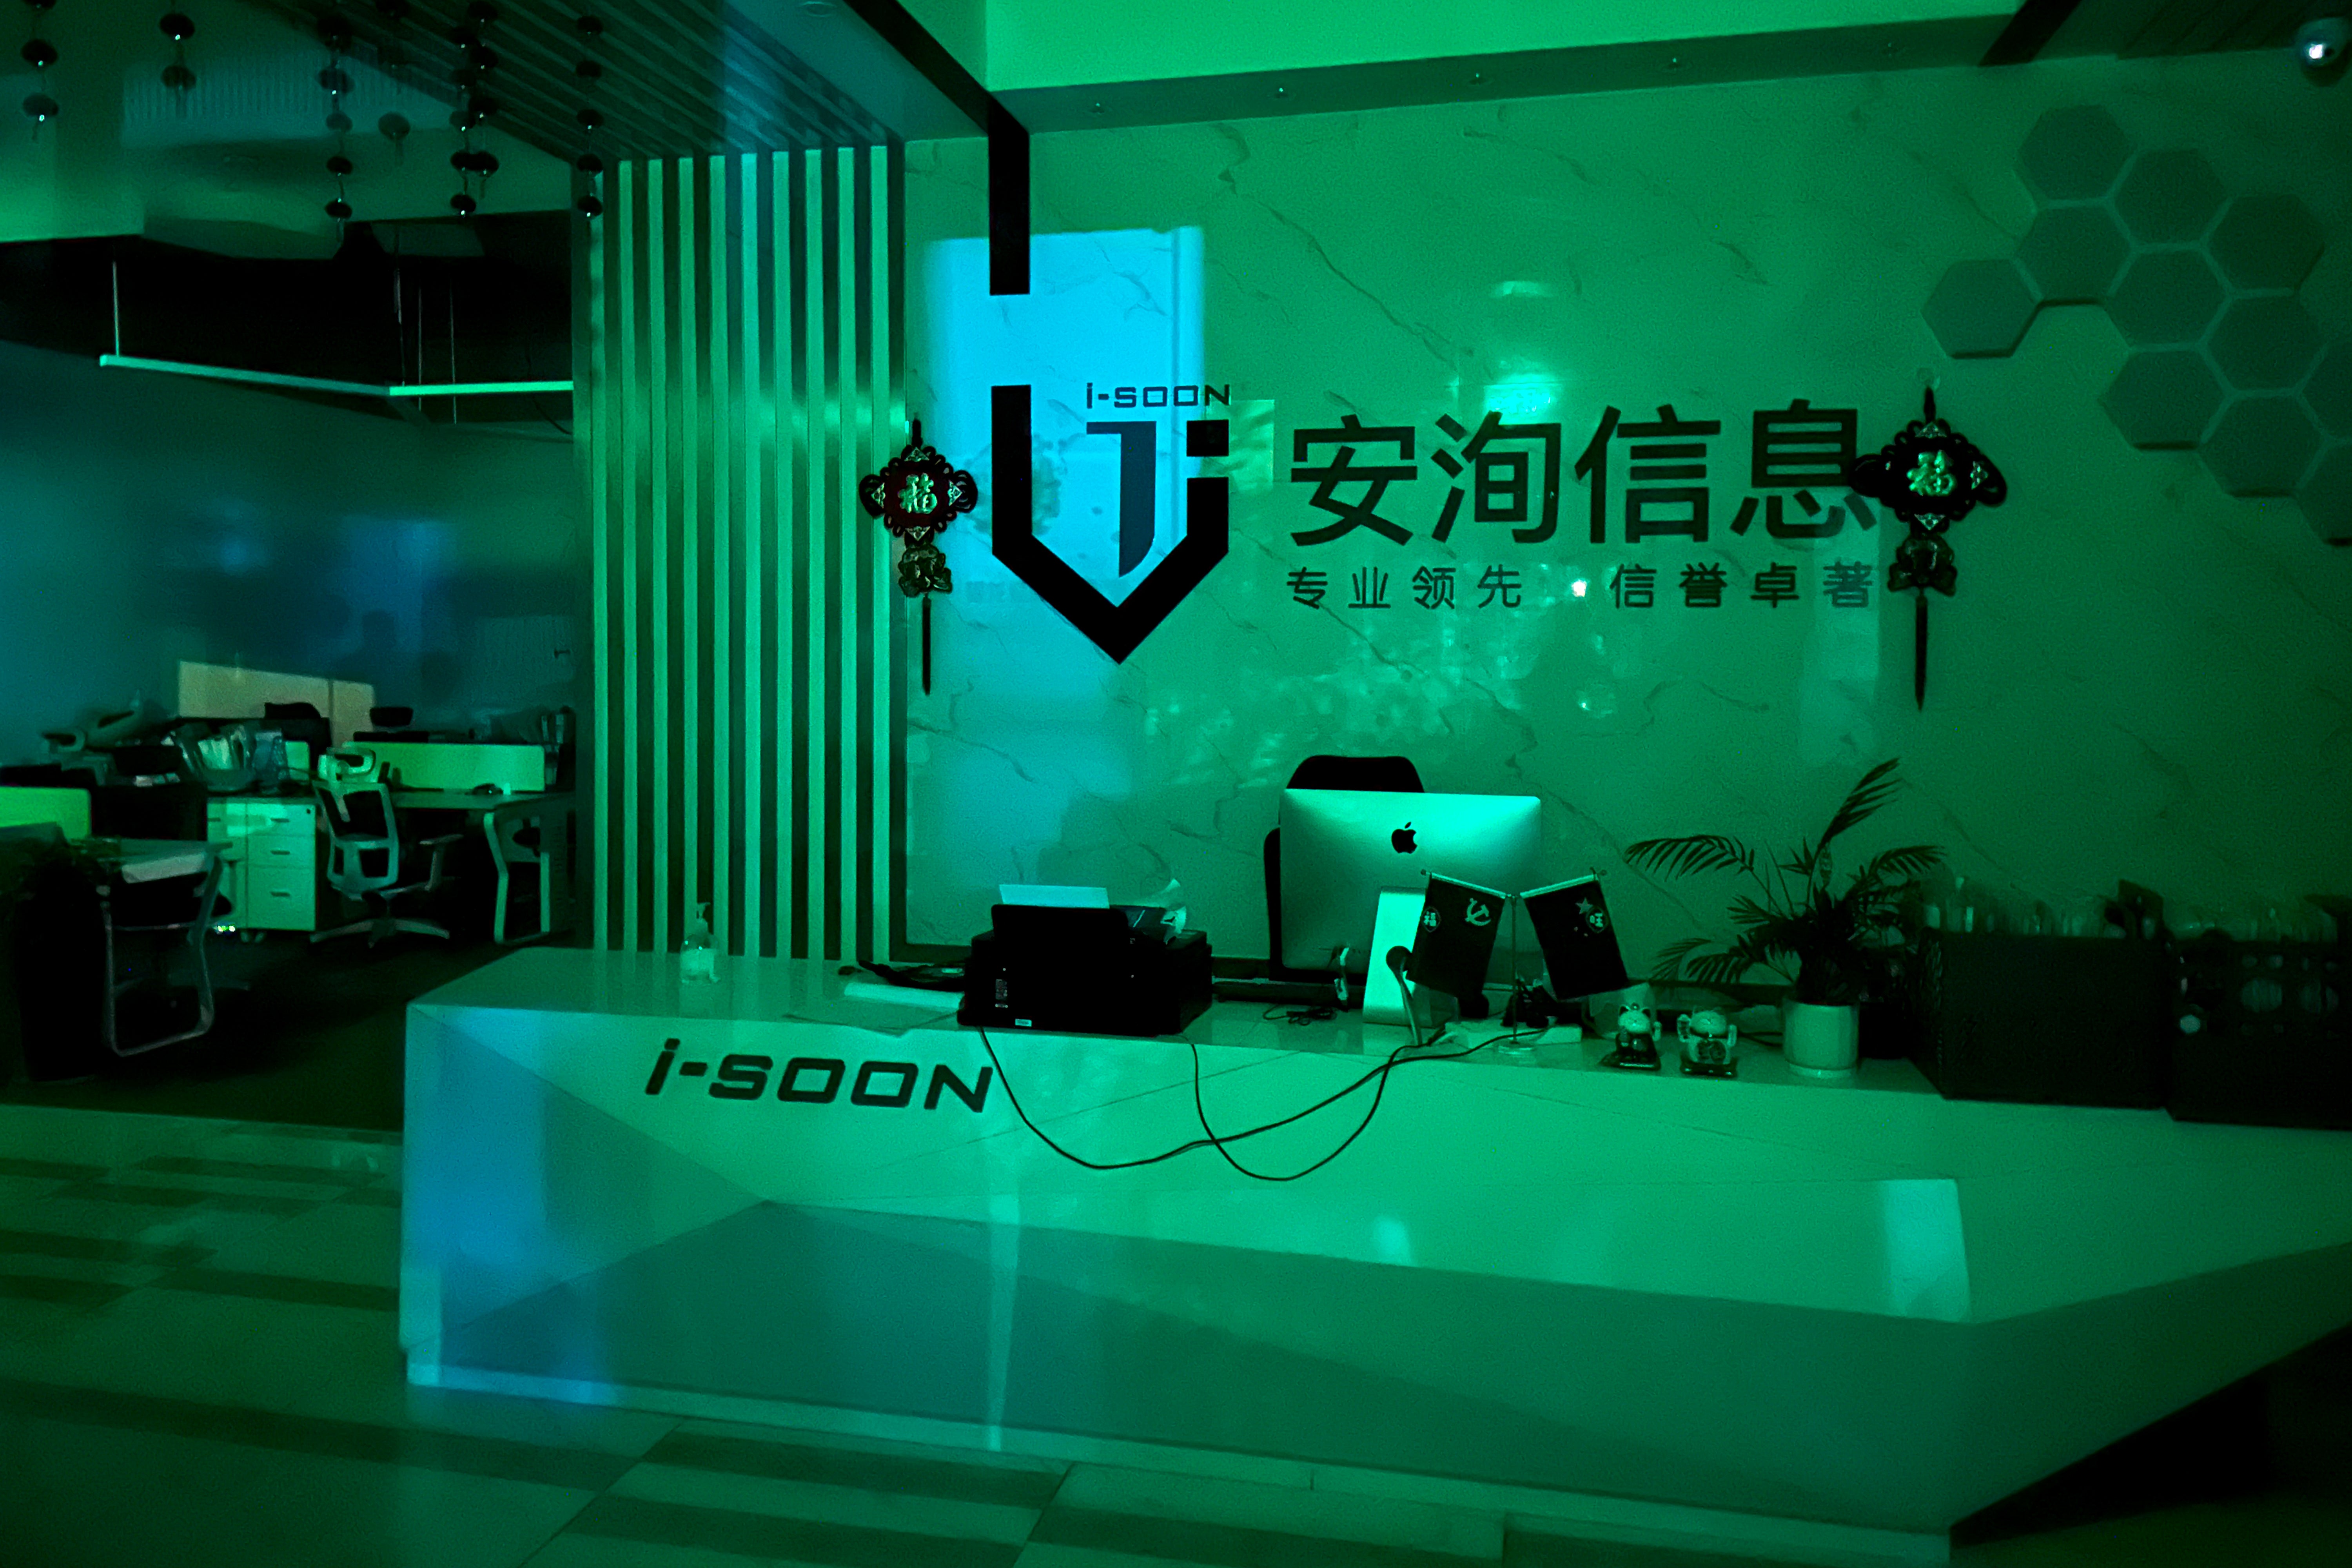 The front desk of the I-Soon office, also known as Anxun in Mandarin, is seen after office hours in Chengdu